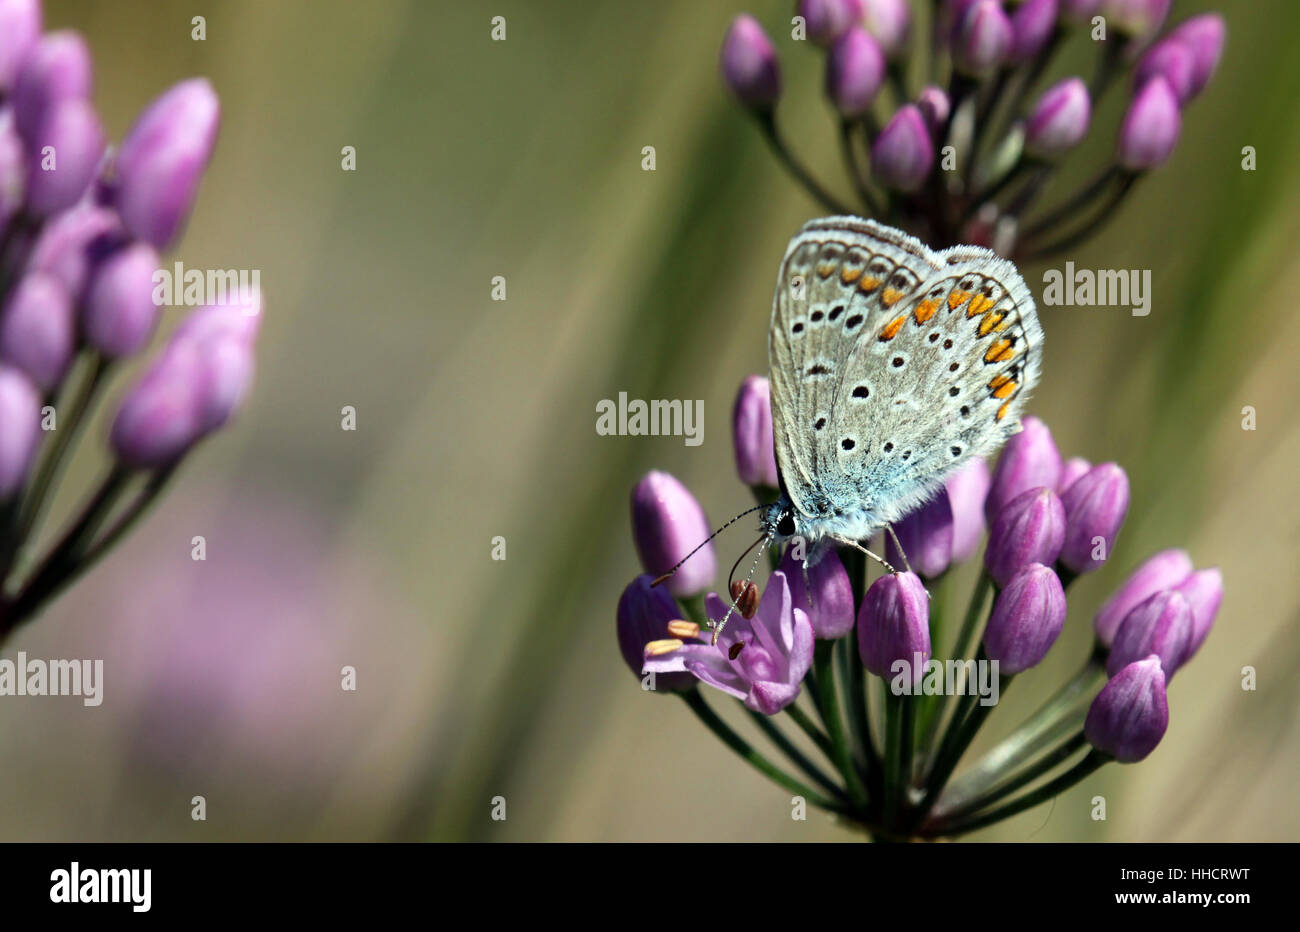 blue, blue, insect, fauna, butterfly, south tyrol, wing, blossoms, purple, Stock Photo